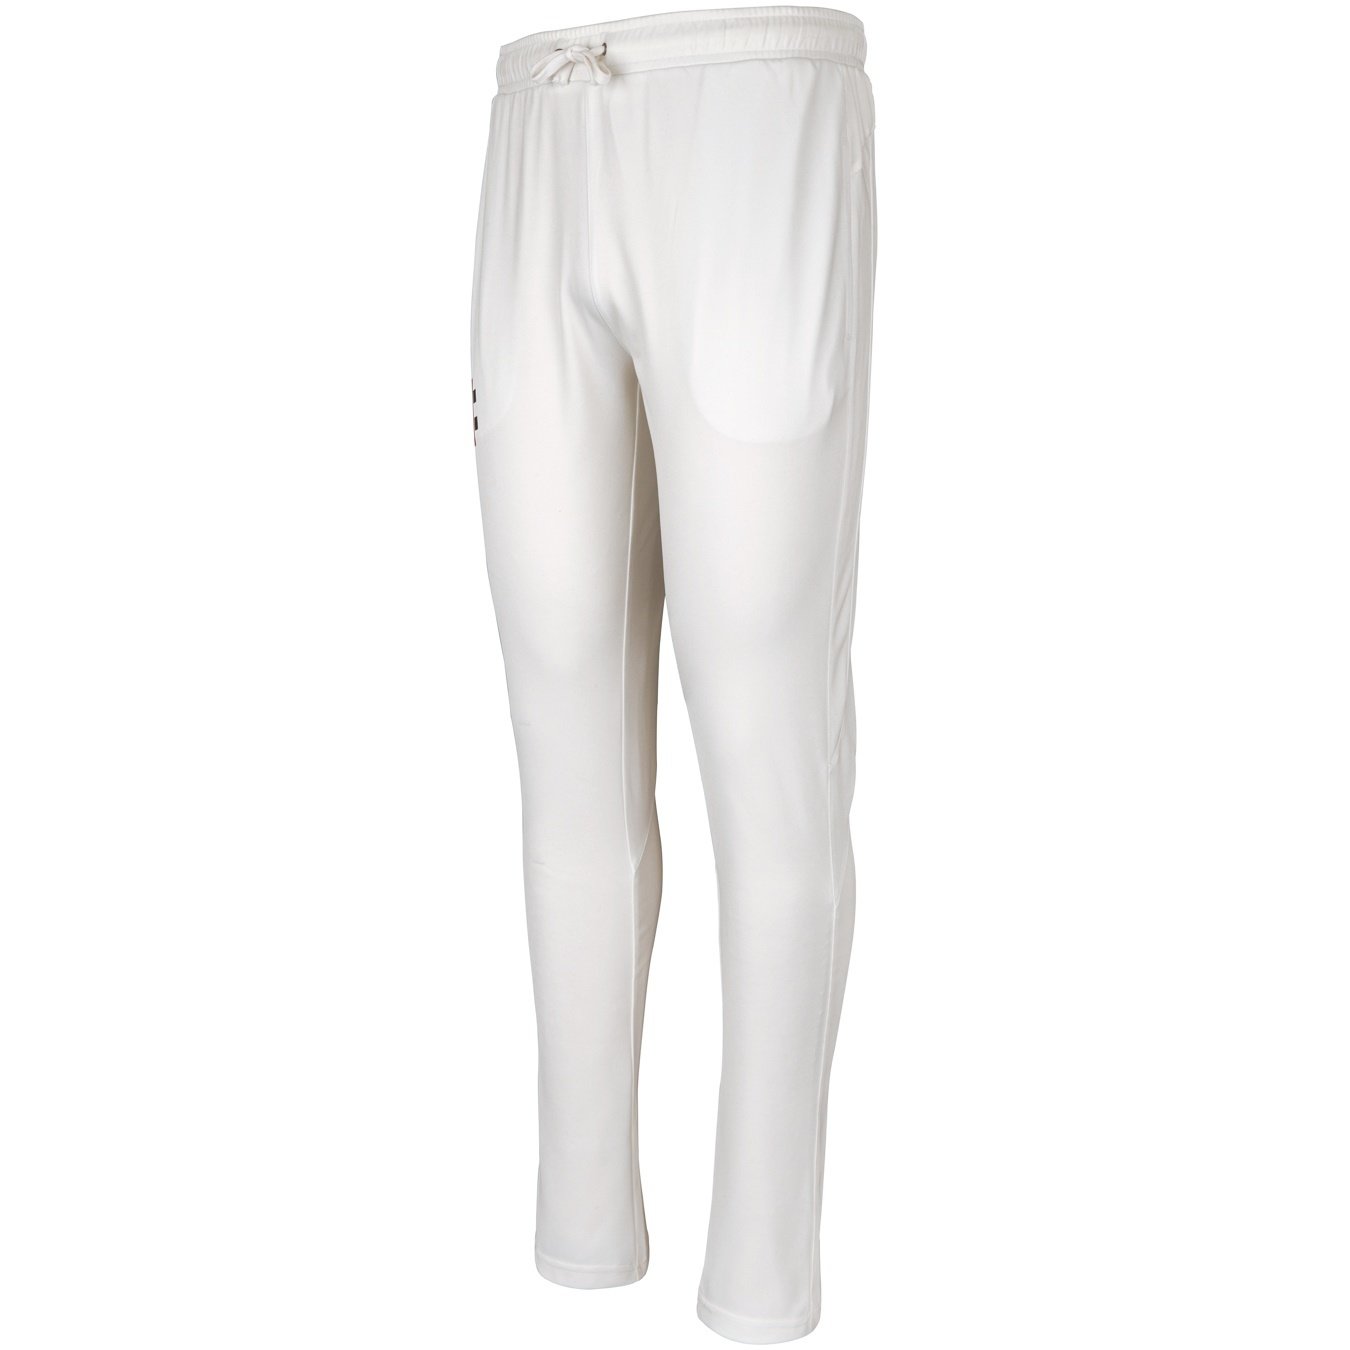 Kirby & Great Broughton Pro Performance Cricket Trousers